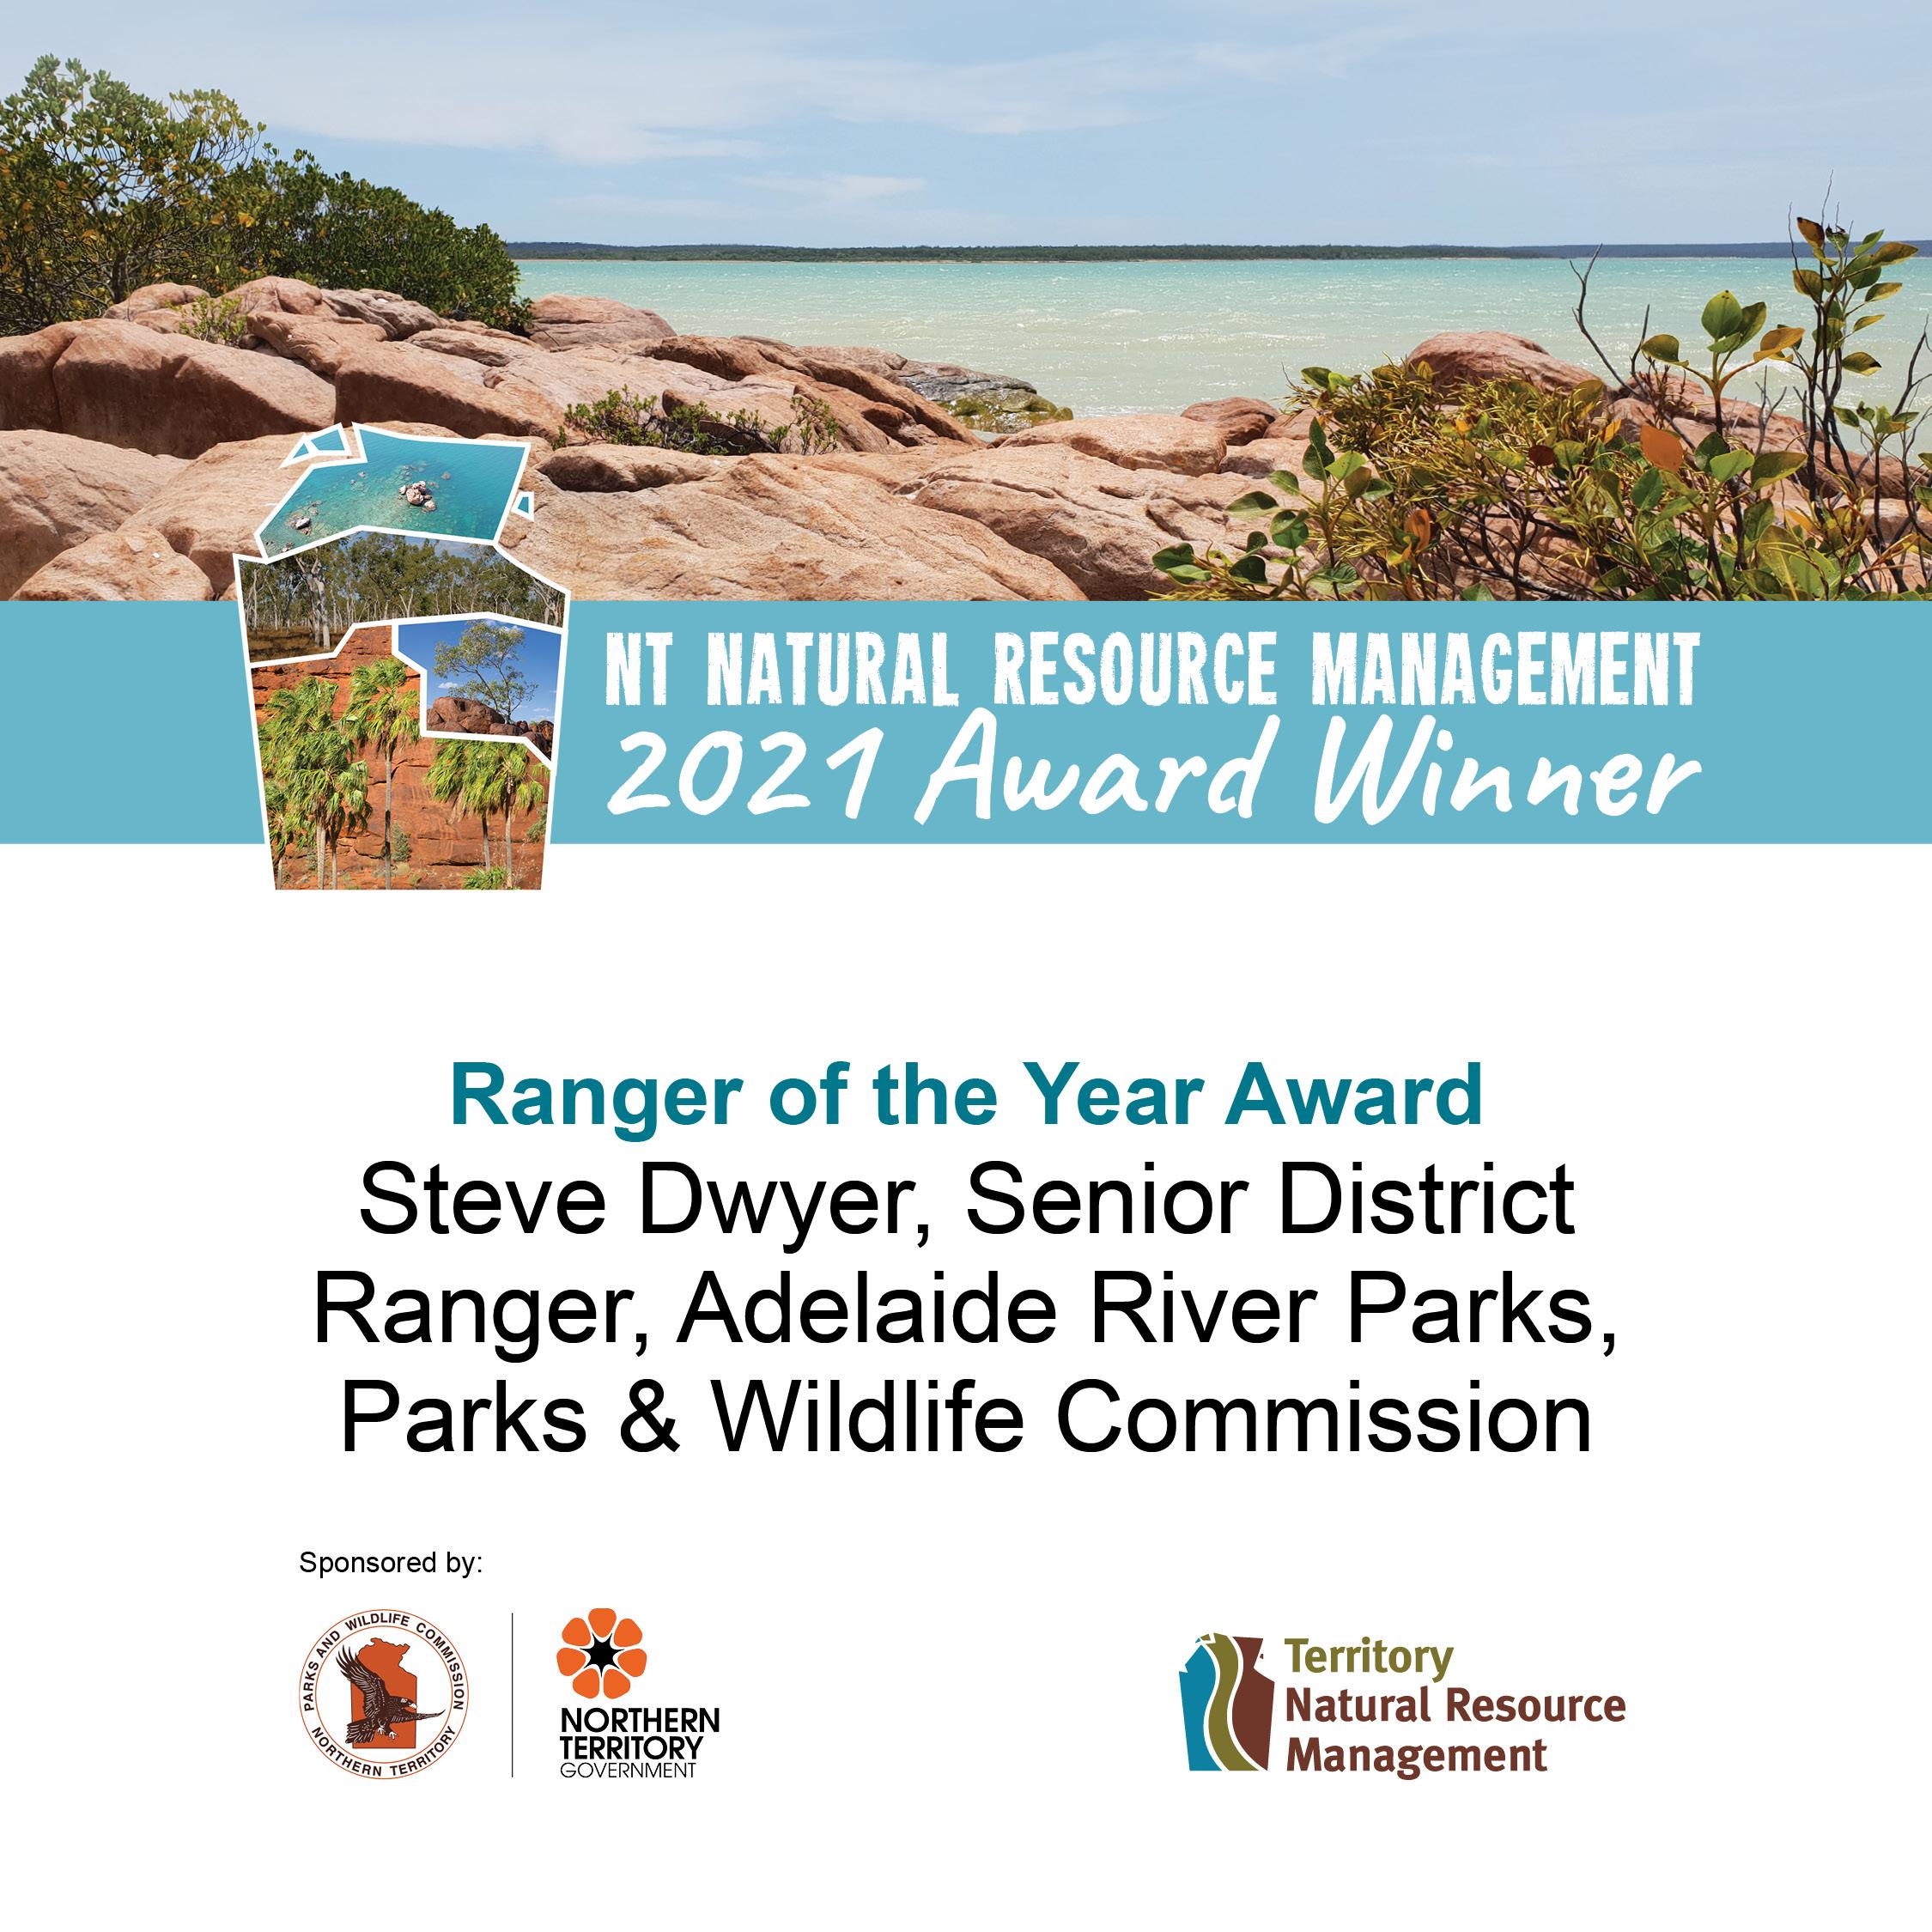 Image reads "NT Natural Resource Management 2021 Award Winner. Ranger of the Year Awards. Steve Dwyer, Senior District Ranger, Adelaide River Parks, Parks & Wildlife Commission. It includes the Parks and WIldlife commision, NT Government and Territory Natural Resource management logos.